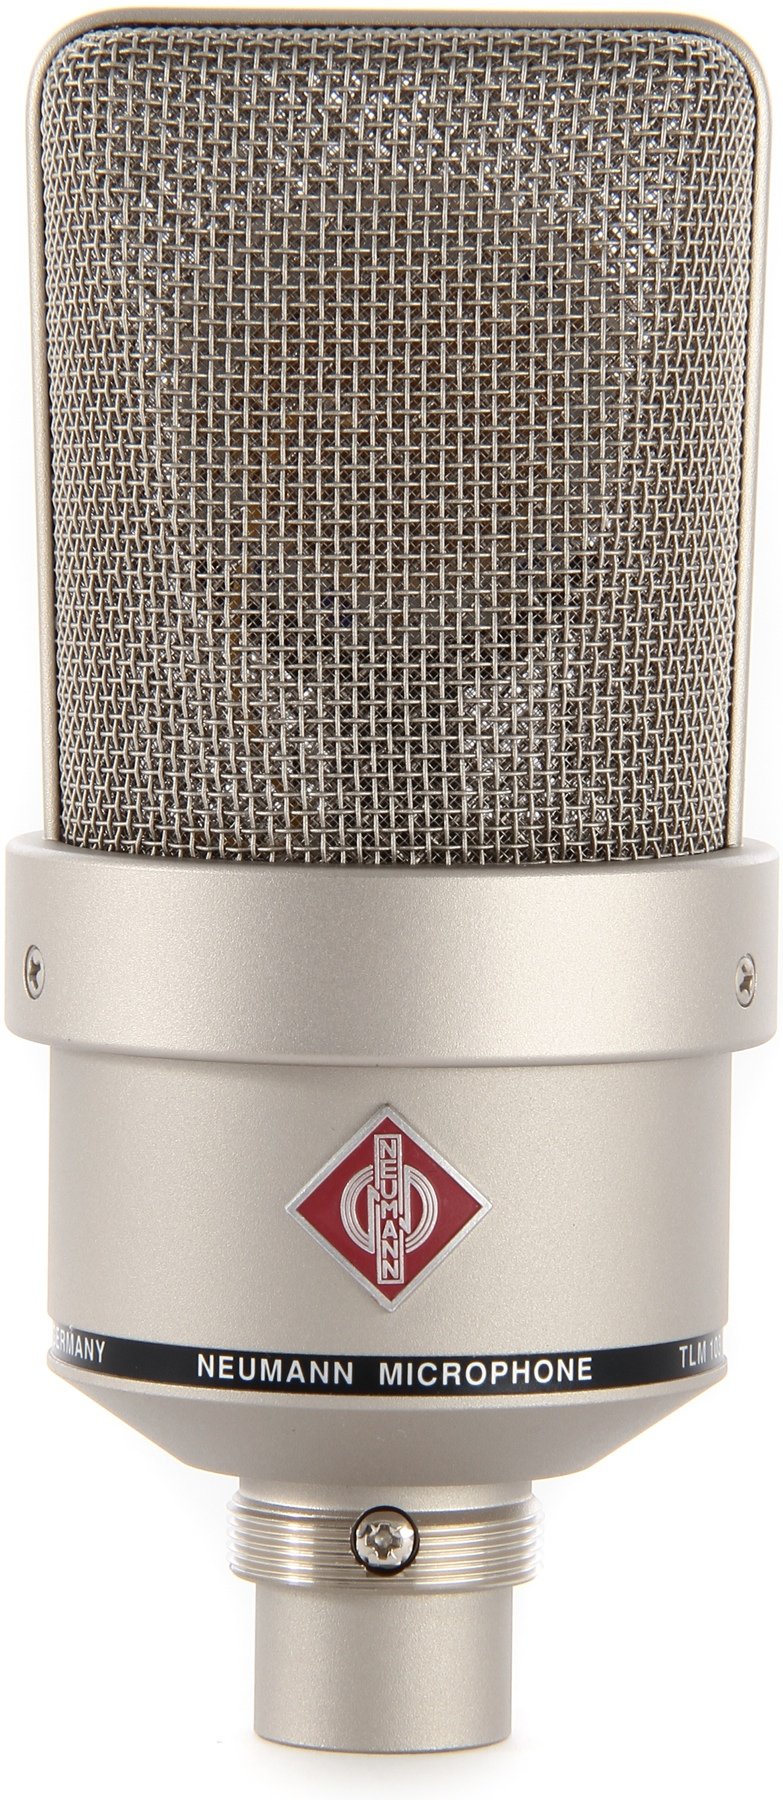 Neumann TLM 103 - Stereo Large Diaphragm Microphone - Nickel - Microphones - Professional Audio Design, Inc